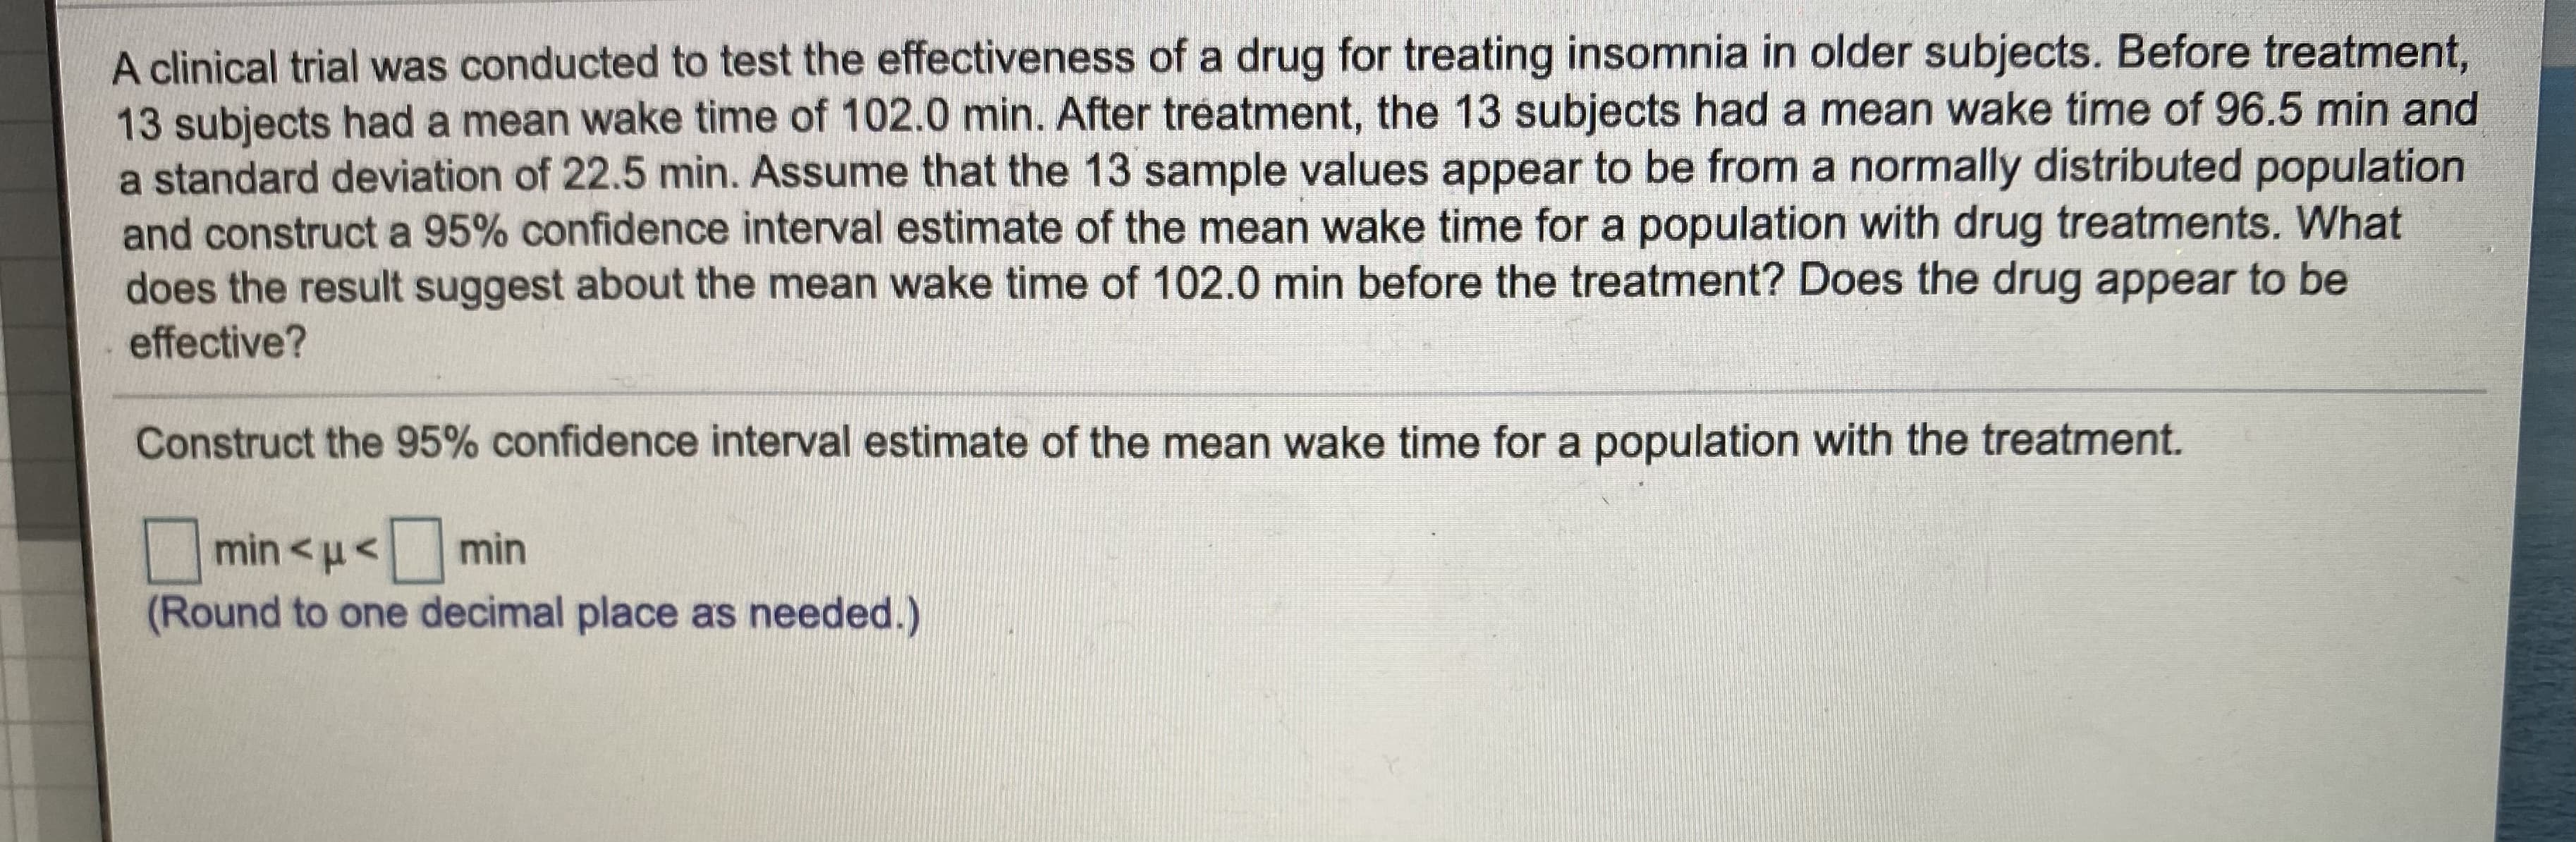 Construct the 95% confidence interval estimate of the mean wake time for a population with the treatment.
min <u< min
(Round to one decimal place as needed.)
